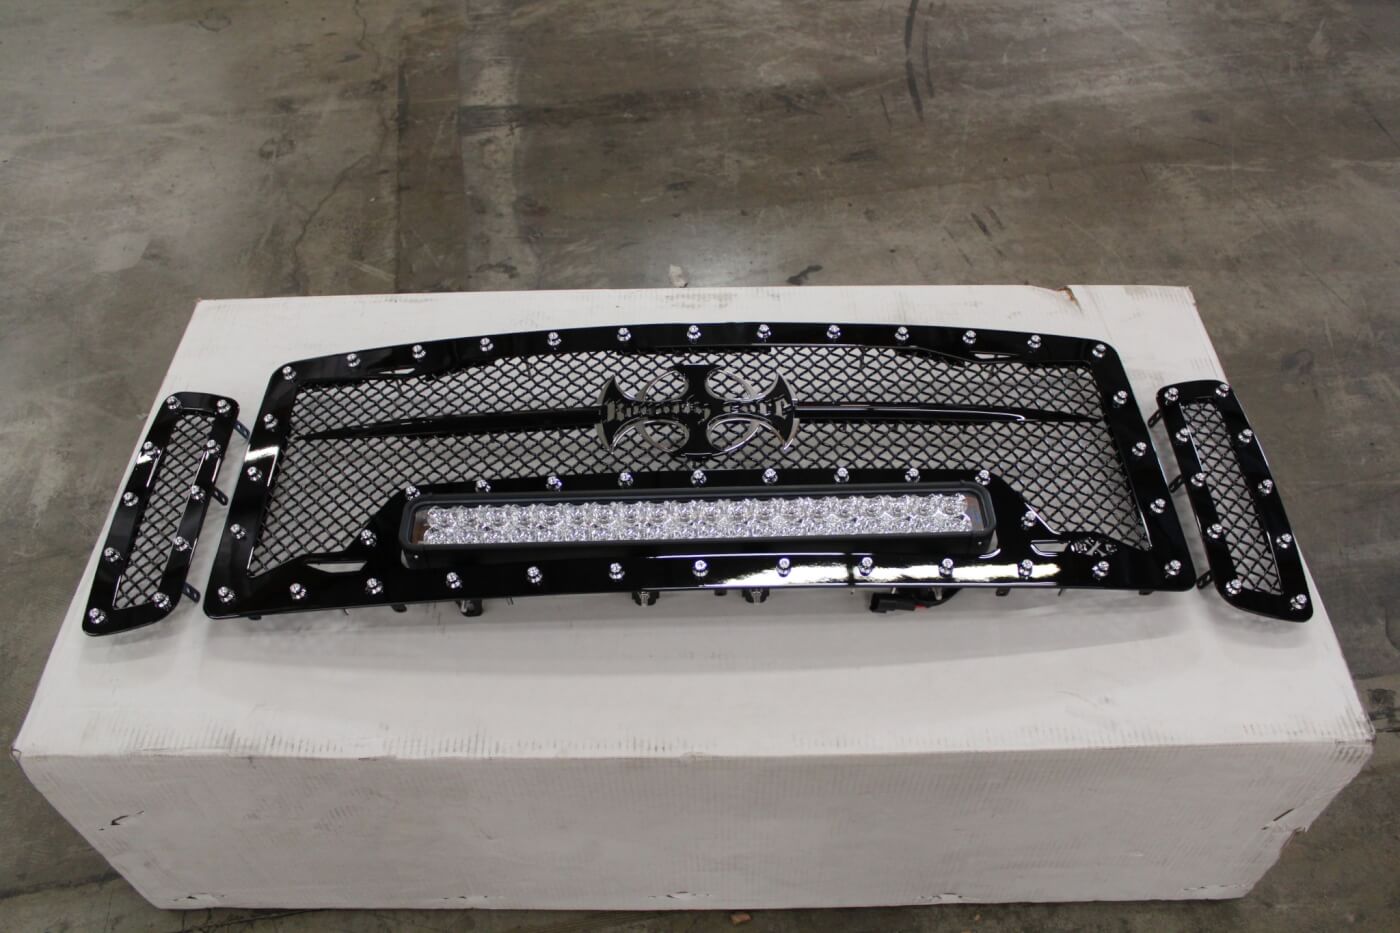 1. We decided to take a two-pronged approach to our truck's new nose. The first was the TrailReady bumper, installation of which was covered in our last issue (Diesel World, December 2014). The second is a Royalty Core RC1X Incredible LED grille. This three-piece insert includes a gloss black mesh grille surround with nickel-plated stud accents around all three pieces. The center portion includes a 22-in. Vision X LED light bar on adjustable mounts with an included wiring kit. The grille feels solid and well constructed, with TIG welding and stainless steel mounting hardware.